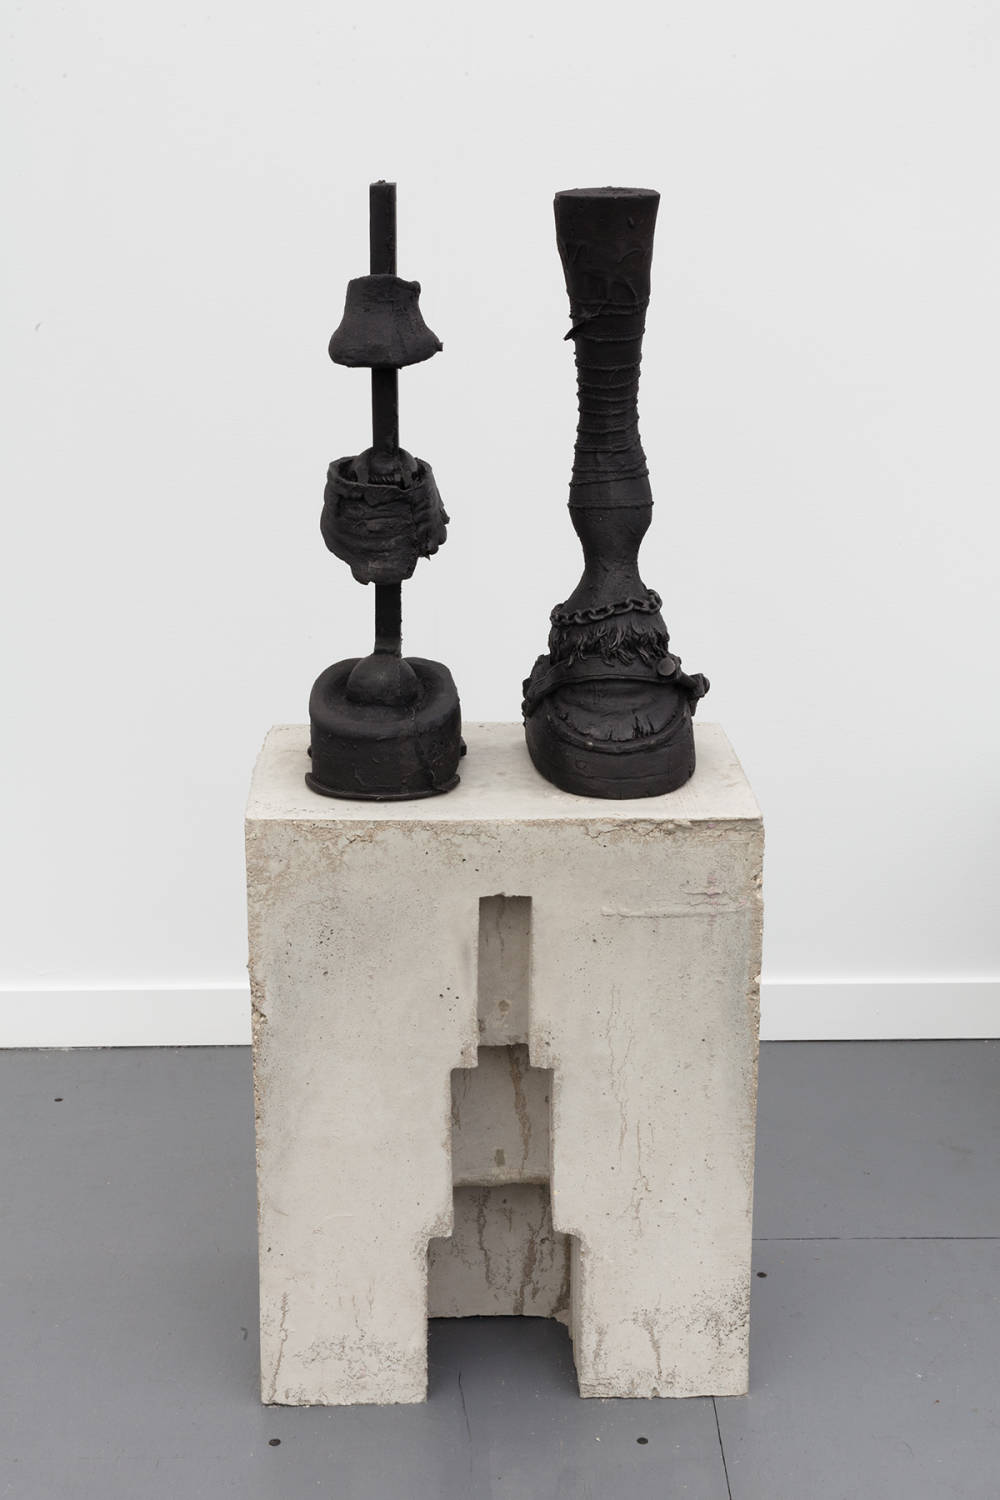 Installation view of cast iron and concrete sculpture, depicting a disembodied horse hoof on top of a concrete plinth.